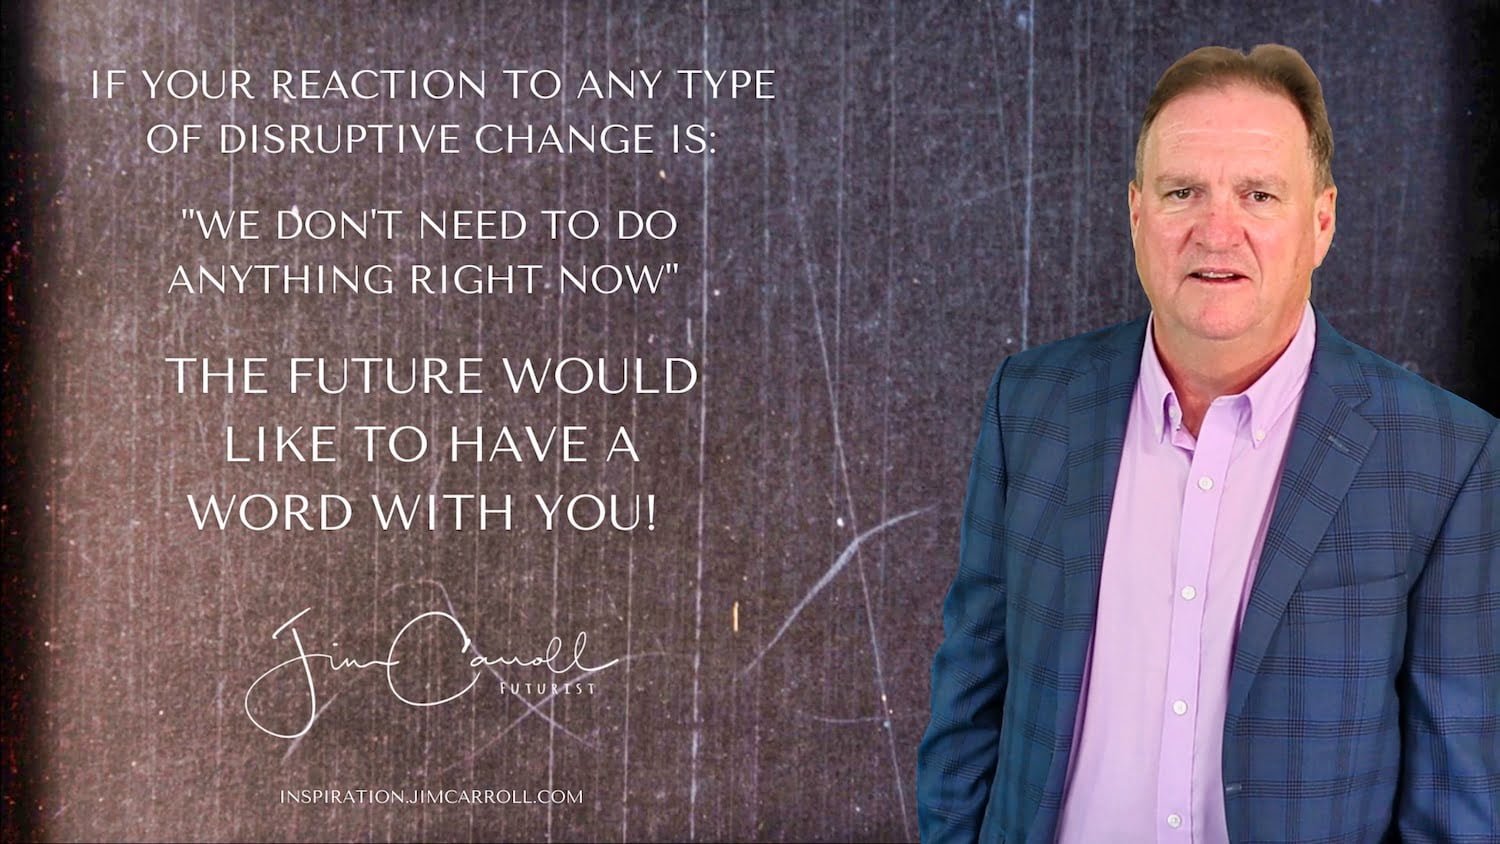 Daily Inspiraton: "If your reaction to any type of disruptive change  'We don't need to do anything right now,' the future would like to have a word with you!"